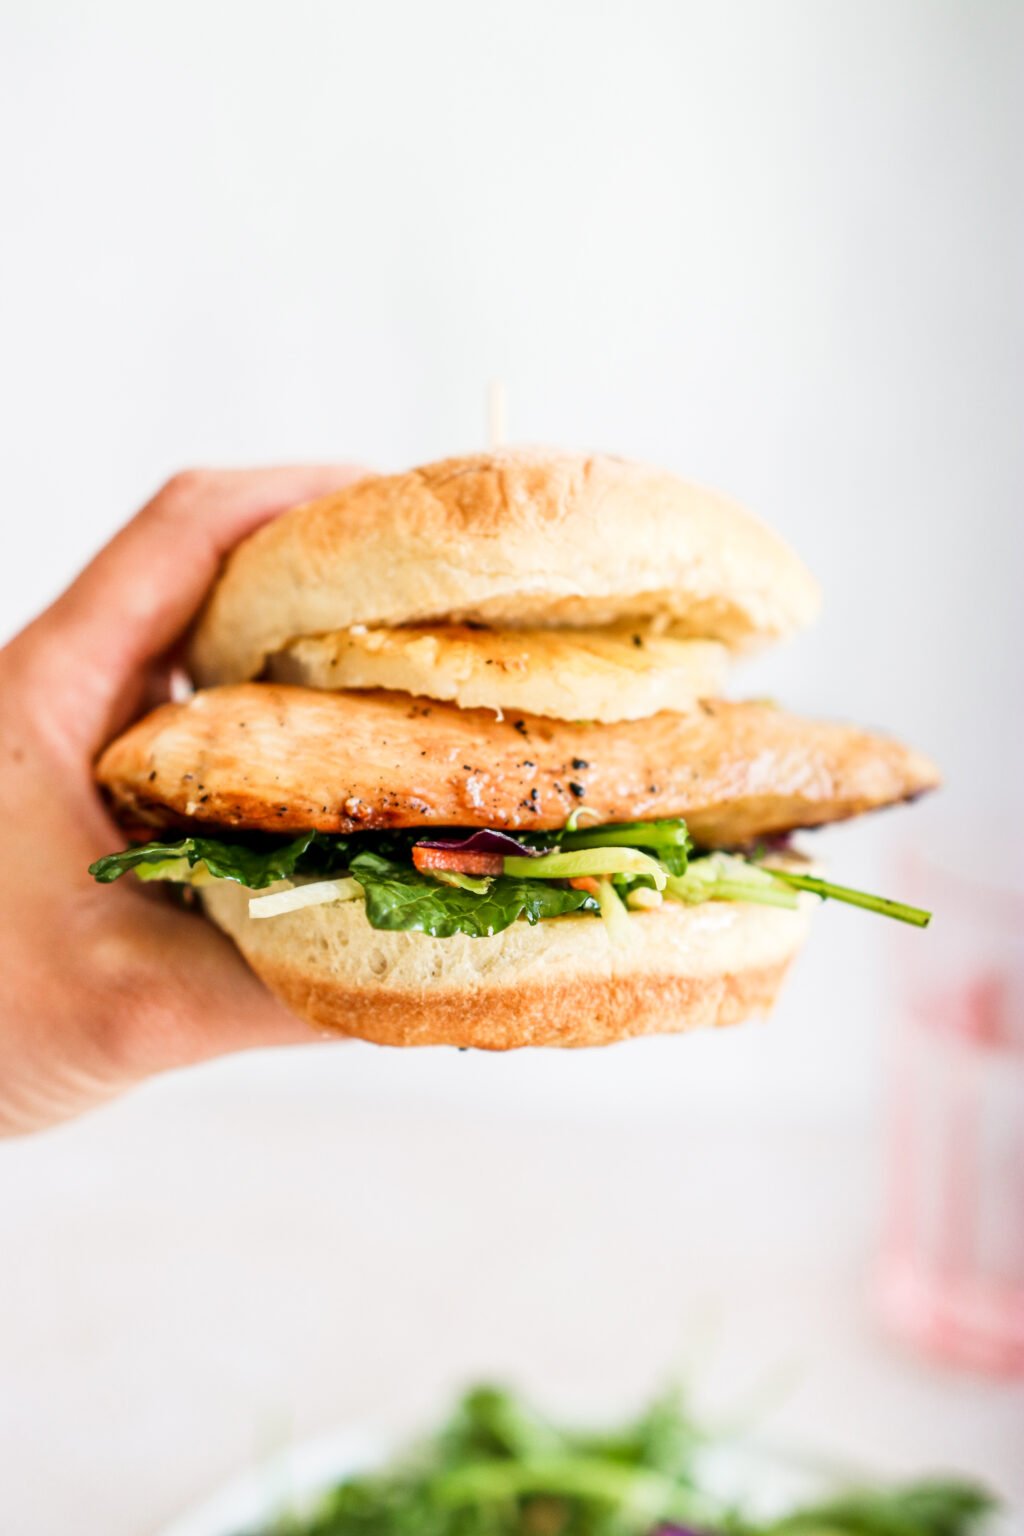 A hand is holding up a grilled chicken burger with a pineapple ring, slaw and spinach.